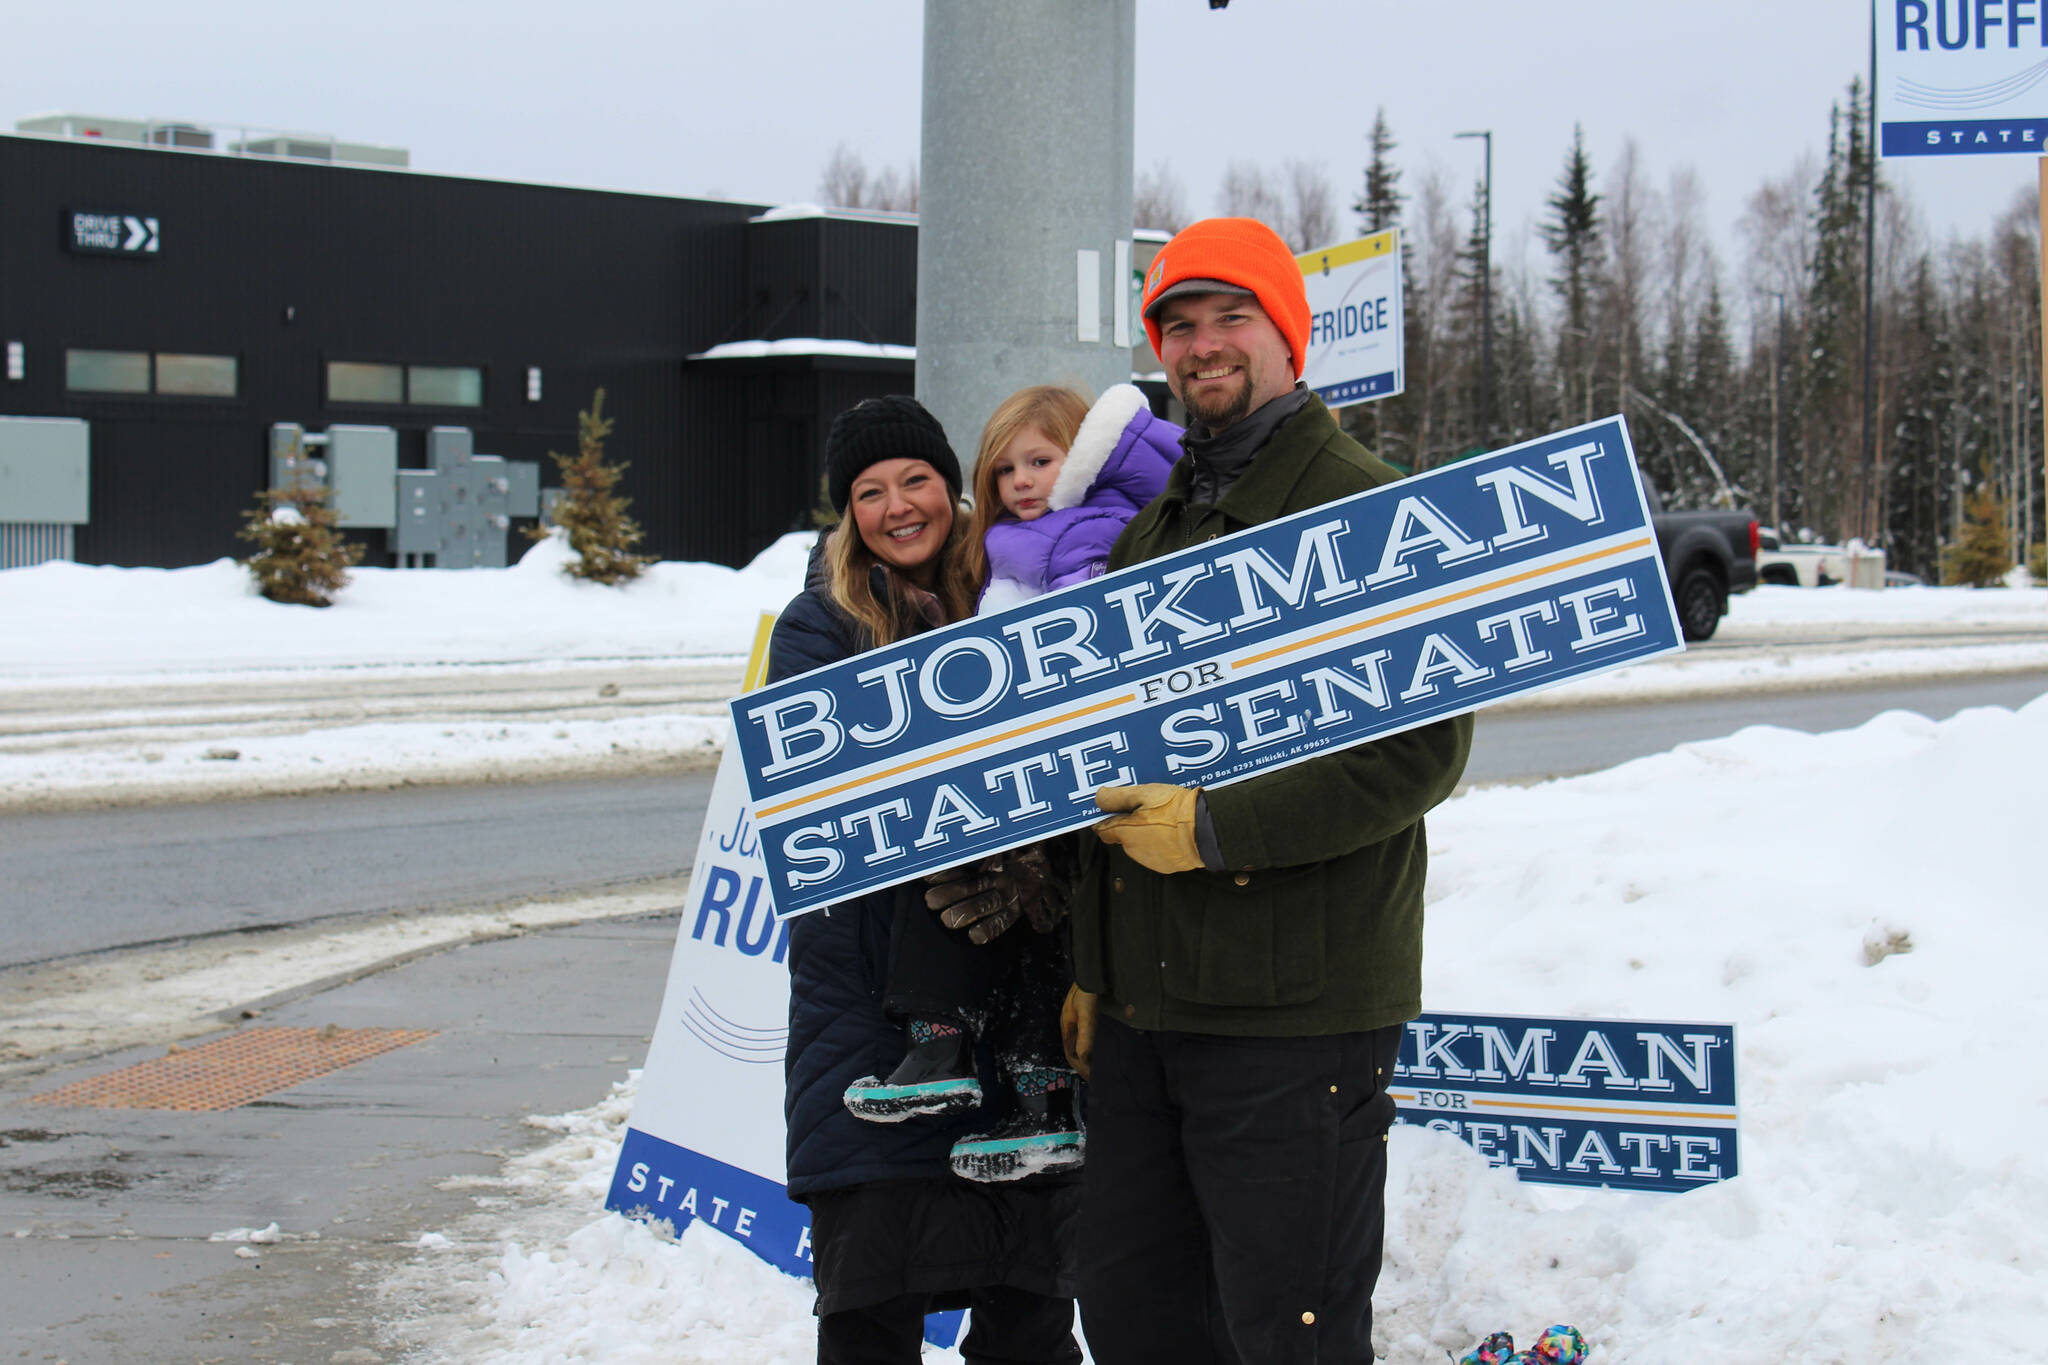 From left, Jamie, Brinna and Jesse Bjorkman wave signs supporting Jesse Bjorkman's bid for Alaska State Senate at the intersection of the Kenai Spur and Sterling highways on Tuesday, Nov. 8, 2022 in Soldotna, Alaska. (Ashlyn O'Hara/Peninsula Clarion)